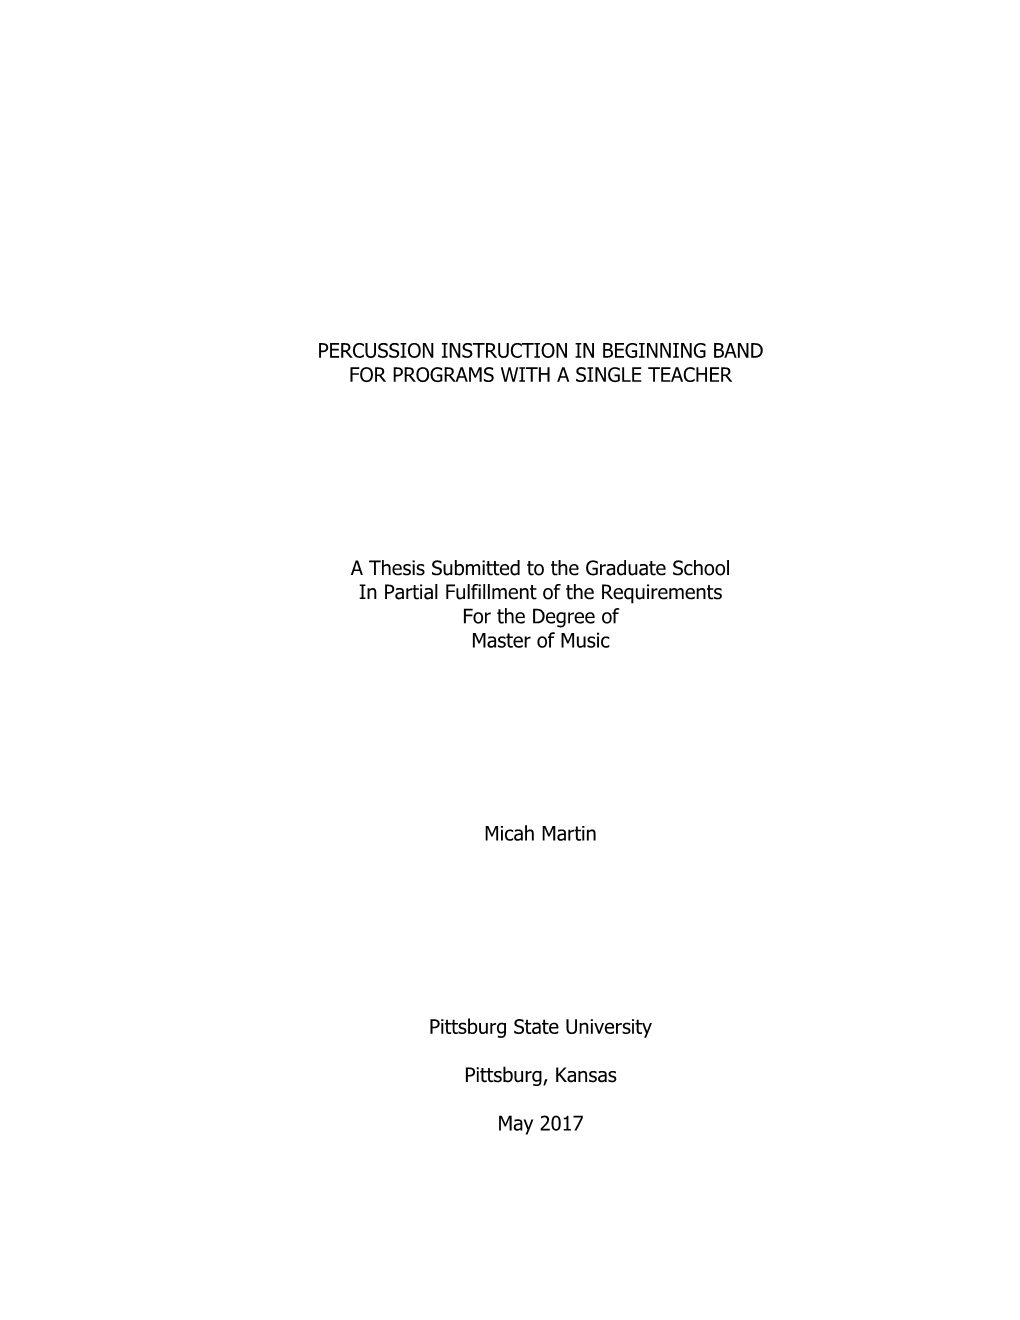 PERCUSSION INSTRUCTION in BEGINNING BAND for PROGRAMS with a SINGLE TEACHER a Thesis Submitted to the Graduate School in Parti